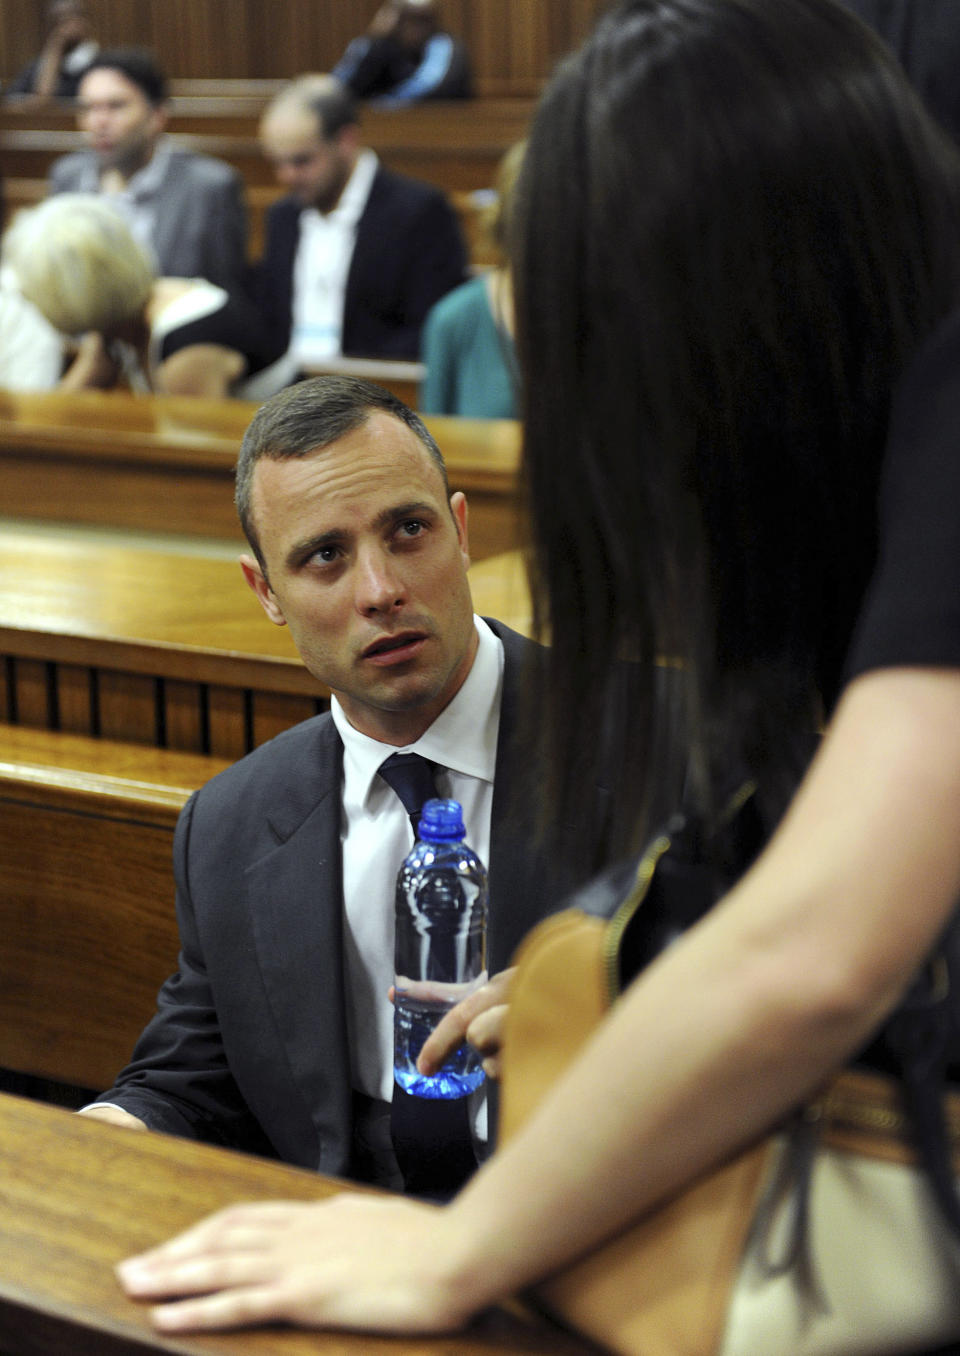 Oscar Pistorius talks to his sister, Aimee Pistorius, before the proceedings get under way at the high court in Pretoria, South Africa, Monday, March 24, 2014. The trial of Pistorius, who is charged with murder for the shooting death of his girlfriend Reeva Steenkamp on Valentines Day in 2013, is beginning its fourth week. (AP Photo/Chris Collingridge, Pool)